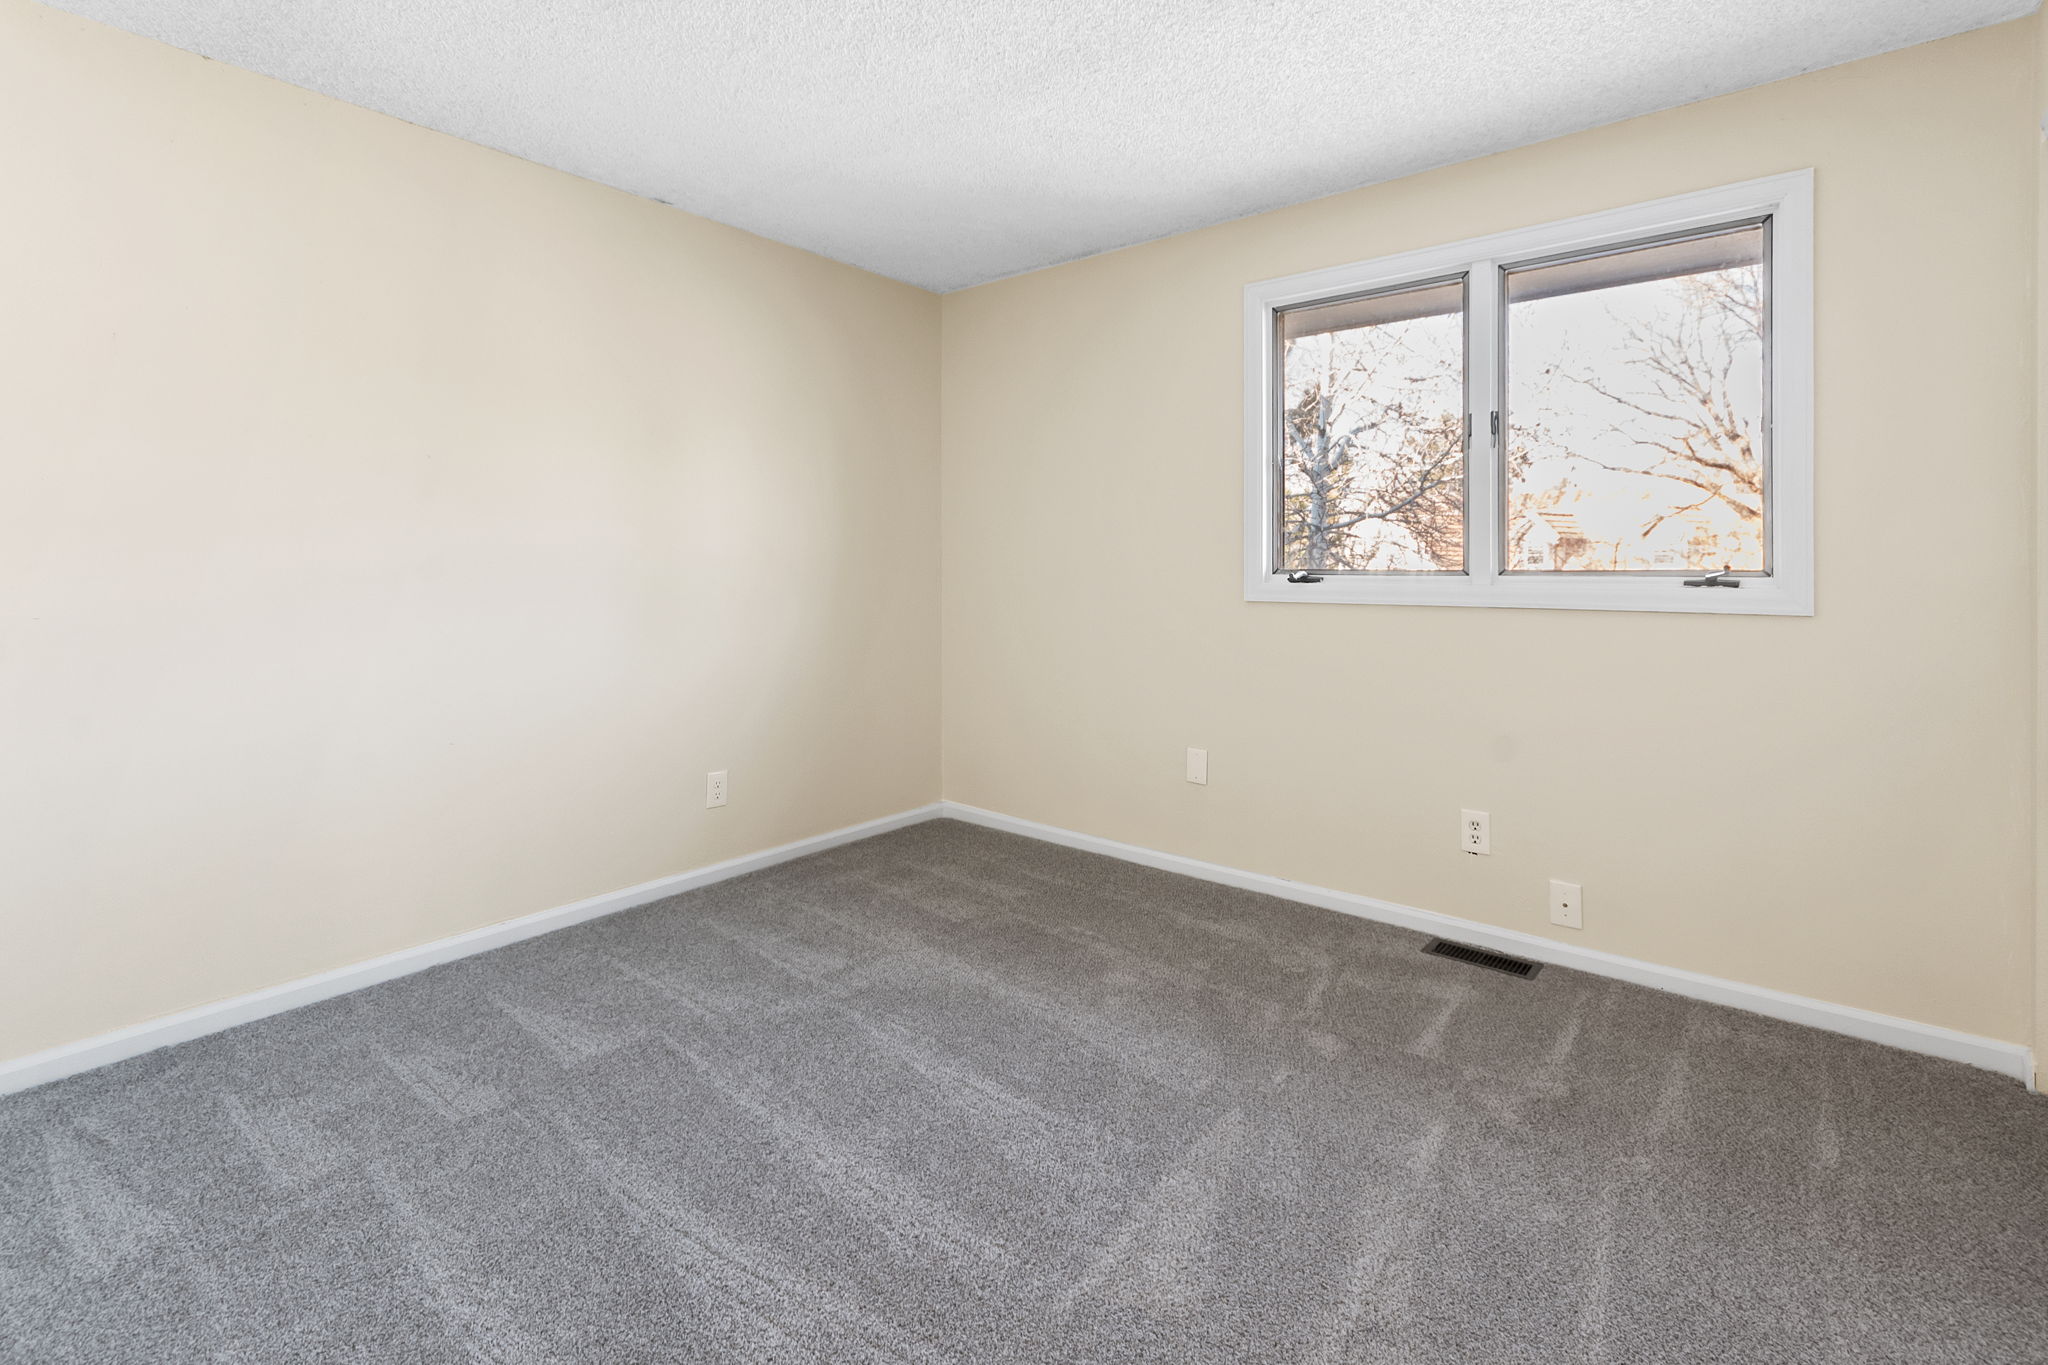  1678 W 115th Cir, Westminster, CO 80234, US Photo 28